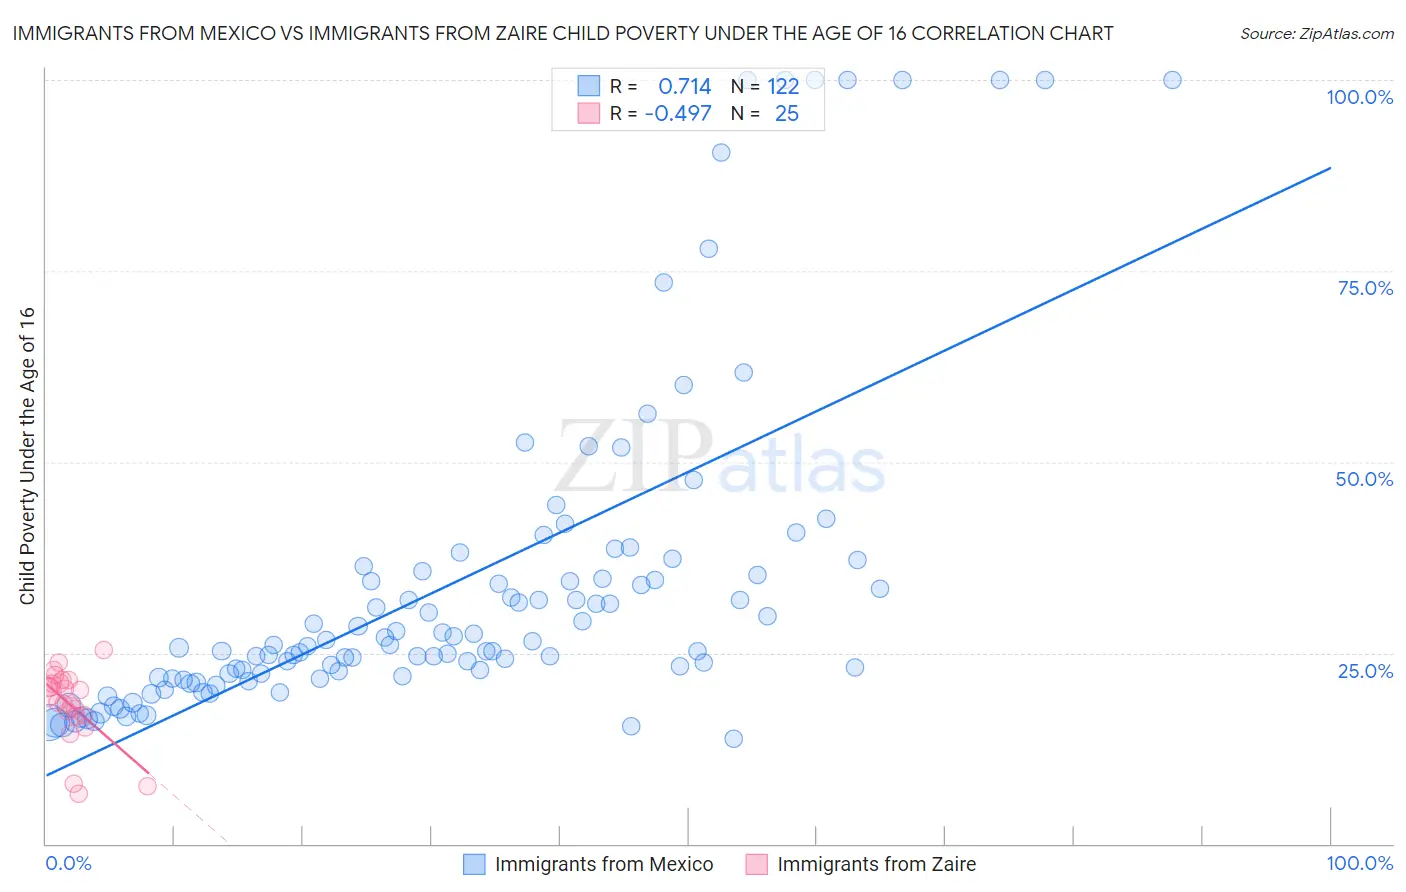 Immigrants from Mexico vs Immigrants from Zaire Child Poverty Under the Age of 16